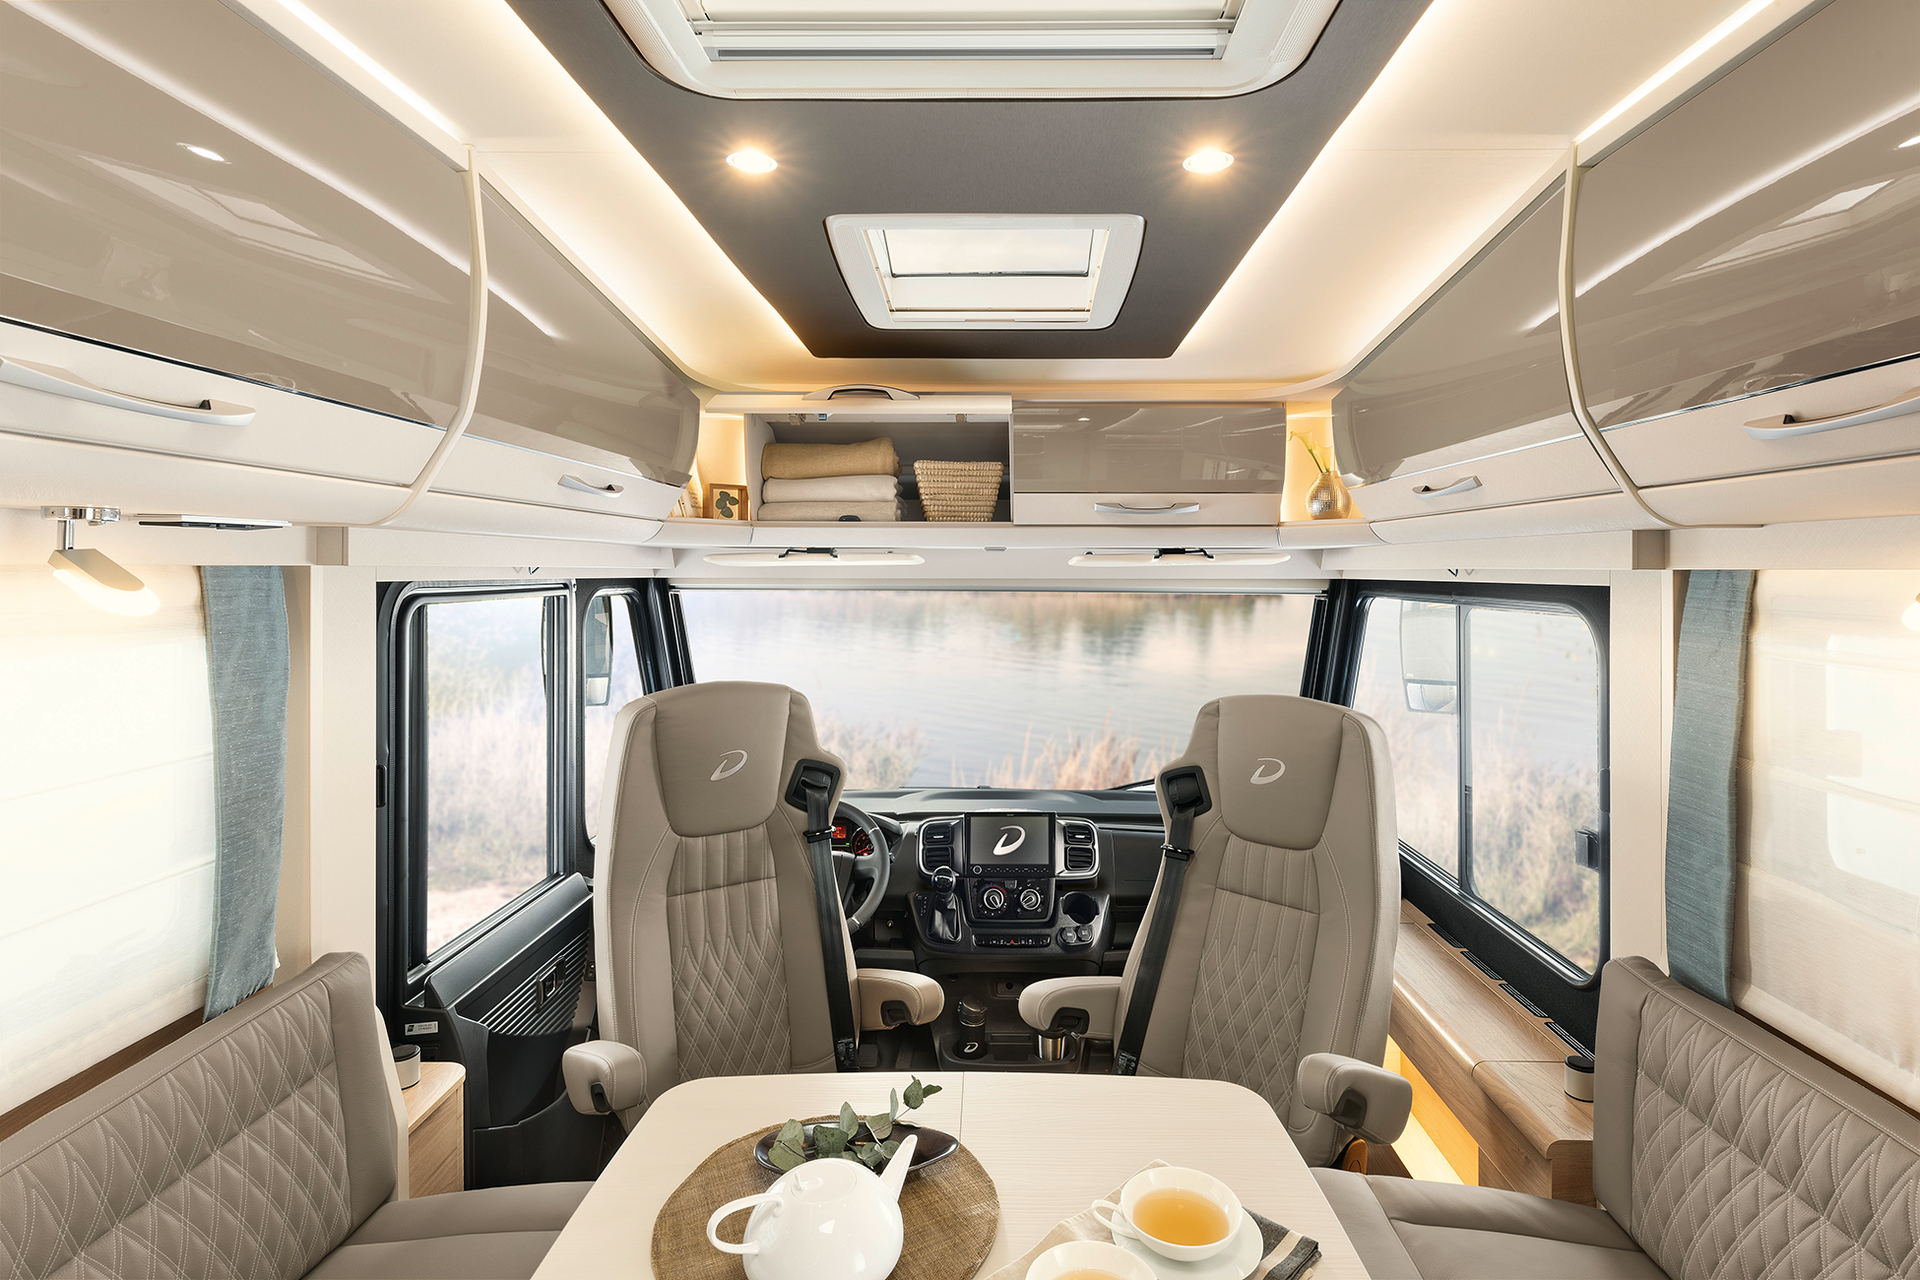 The alternative: furniture in the cab instead of a pull-down bed! This creates an even greater sense of spaciousness and more headroom – as well as additional storage options (optional)